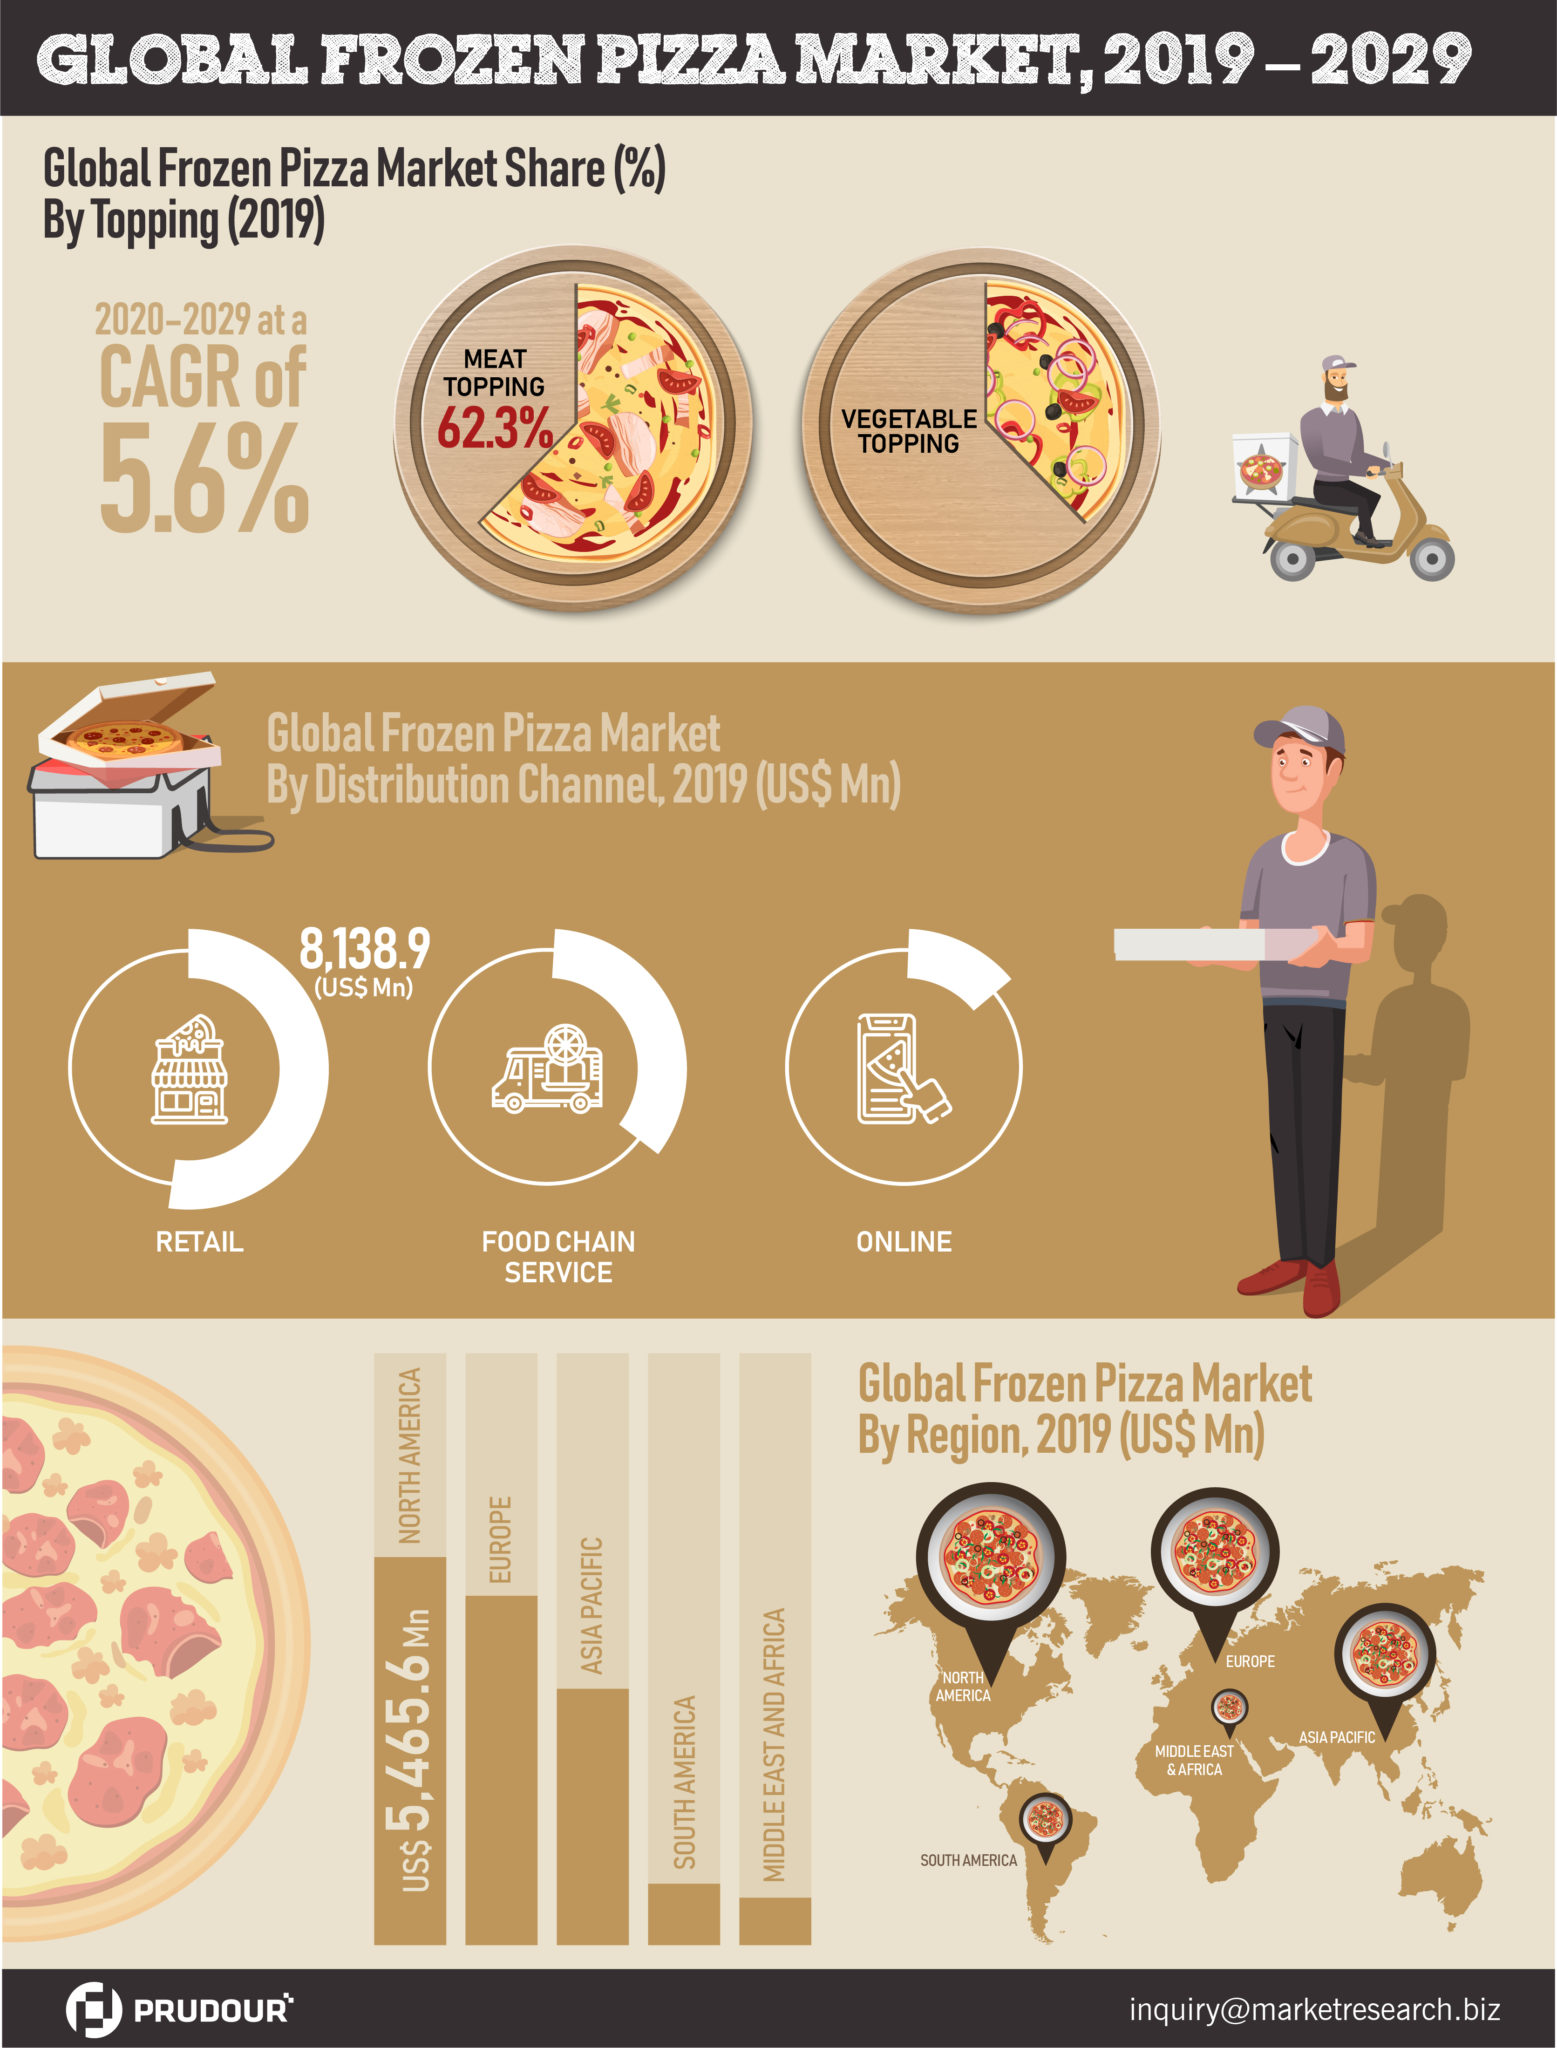 US$ 26 Bn in 2029: Global Frozen Pizza Market is expected to reach US$ 26 Bn in 2029